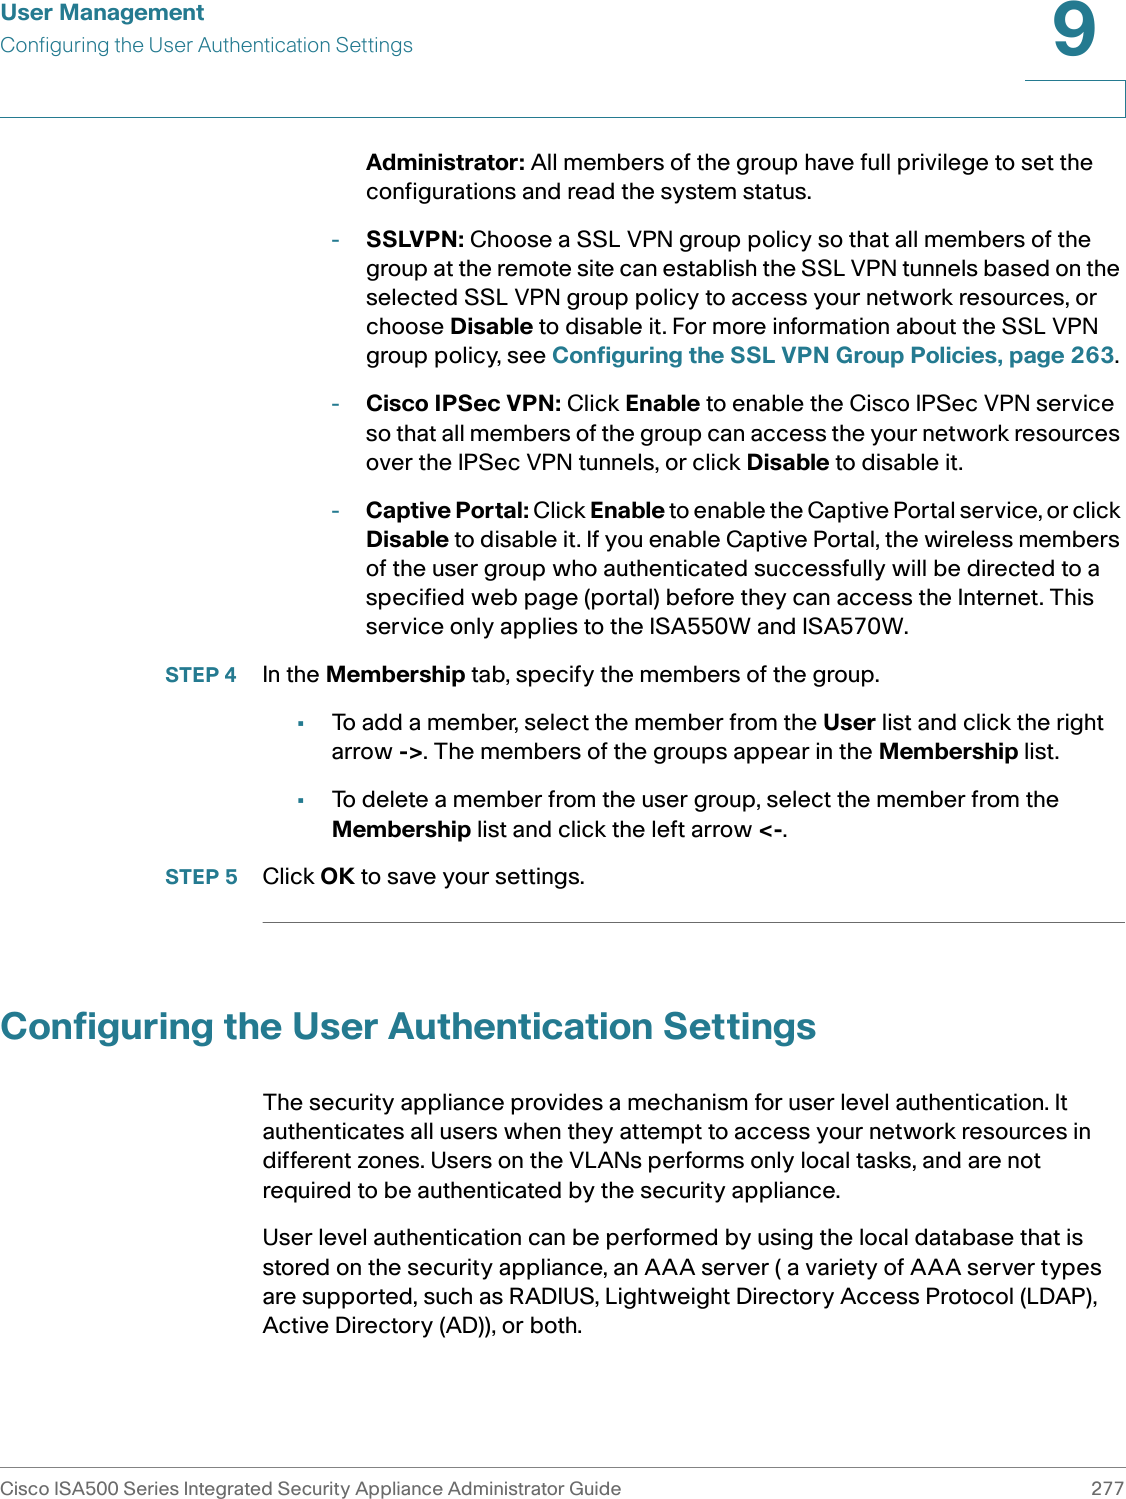 User ManagementConfiguring the User Authentication SettingsCisco ISA500 Series Integrated Security Appliance Administrator Guide 2779 Administrator: All members of the group have full privilege to set the configurations and read the system status. -SSLVPN: Choose a SSL VPN group policy so that all members of the group at the remote site can establish the SSL VPN tunnels based on the selected SSL VPN group policy to access your network resources, or choose Disable to disable it. For more information about the SSL VPN group policy, see Configuring the SSL VPN Group Policies, page 263. -Cisco IPSec VPN: Click Enable to enable the Cisco IPSec VPN service so that all members of the group can access the your network resources over the IPSec VPN tunnels, or click Disable to disable it. -Captive Portal: Click Enable to enable the Captive Portal service, or click Disable to disable it. If you enable Captive Portal, the wireless members of the user group who authenticated successfully will be directed to a specified web page (portal) before they can access the Internet. This service only applies to the ISA550W and ISA570W. STEP 4 In the Membership tab, specify the members of the group. •To add a member, select the member from the User list and click the right arrow -&gt;. The members of the groups appear in the Membership list. •To delete a member from the user group, select the member from the Membership list and click the left arrow &lt;-. STEP 5 Click OK to save your settings.  Configuring the User Authentication SettingsThe security appliance provides a mechanism for user level authentication. It authenticates all users when they attempt to access your network resources in different zones. Users on the VLANs performs only local tasks, and are not required to be authenticated by the security appliance.User level authentication can be performed by using the local database that is stored on the security appliance, an AAA server ( a variety of AAA server types are supported, such as RADIUS, Lightweight Directory Access Protocol (LDAP), Active Directory (AD)), or both. 